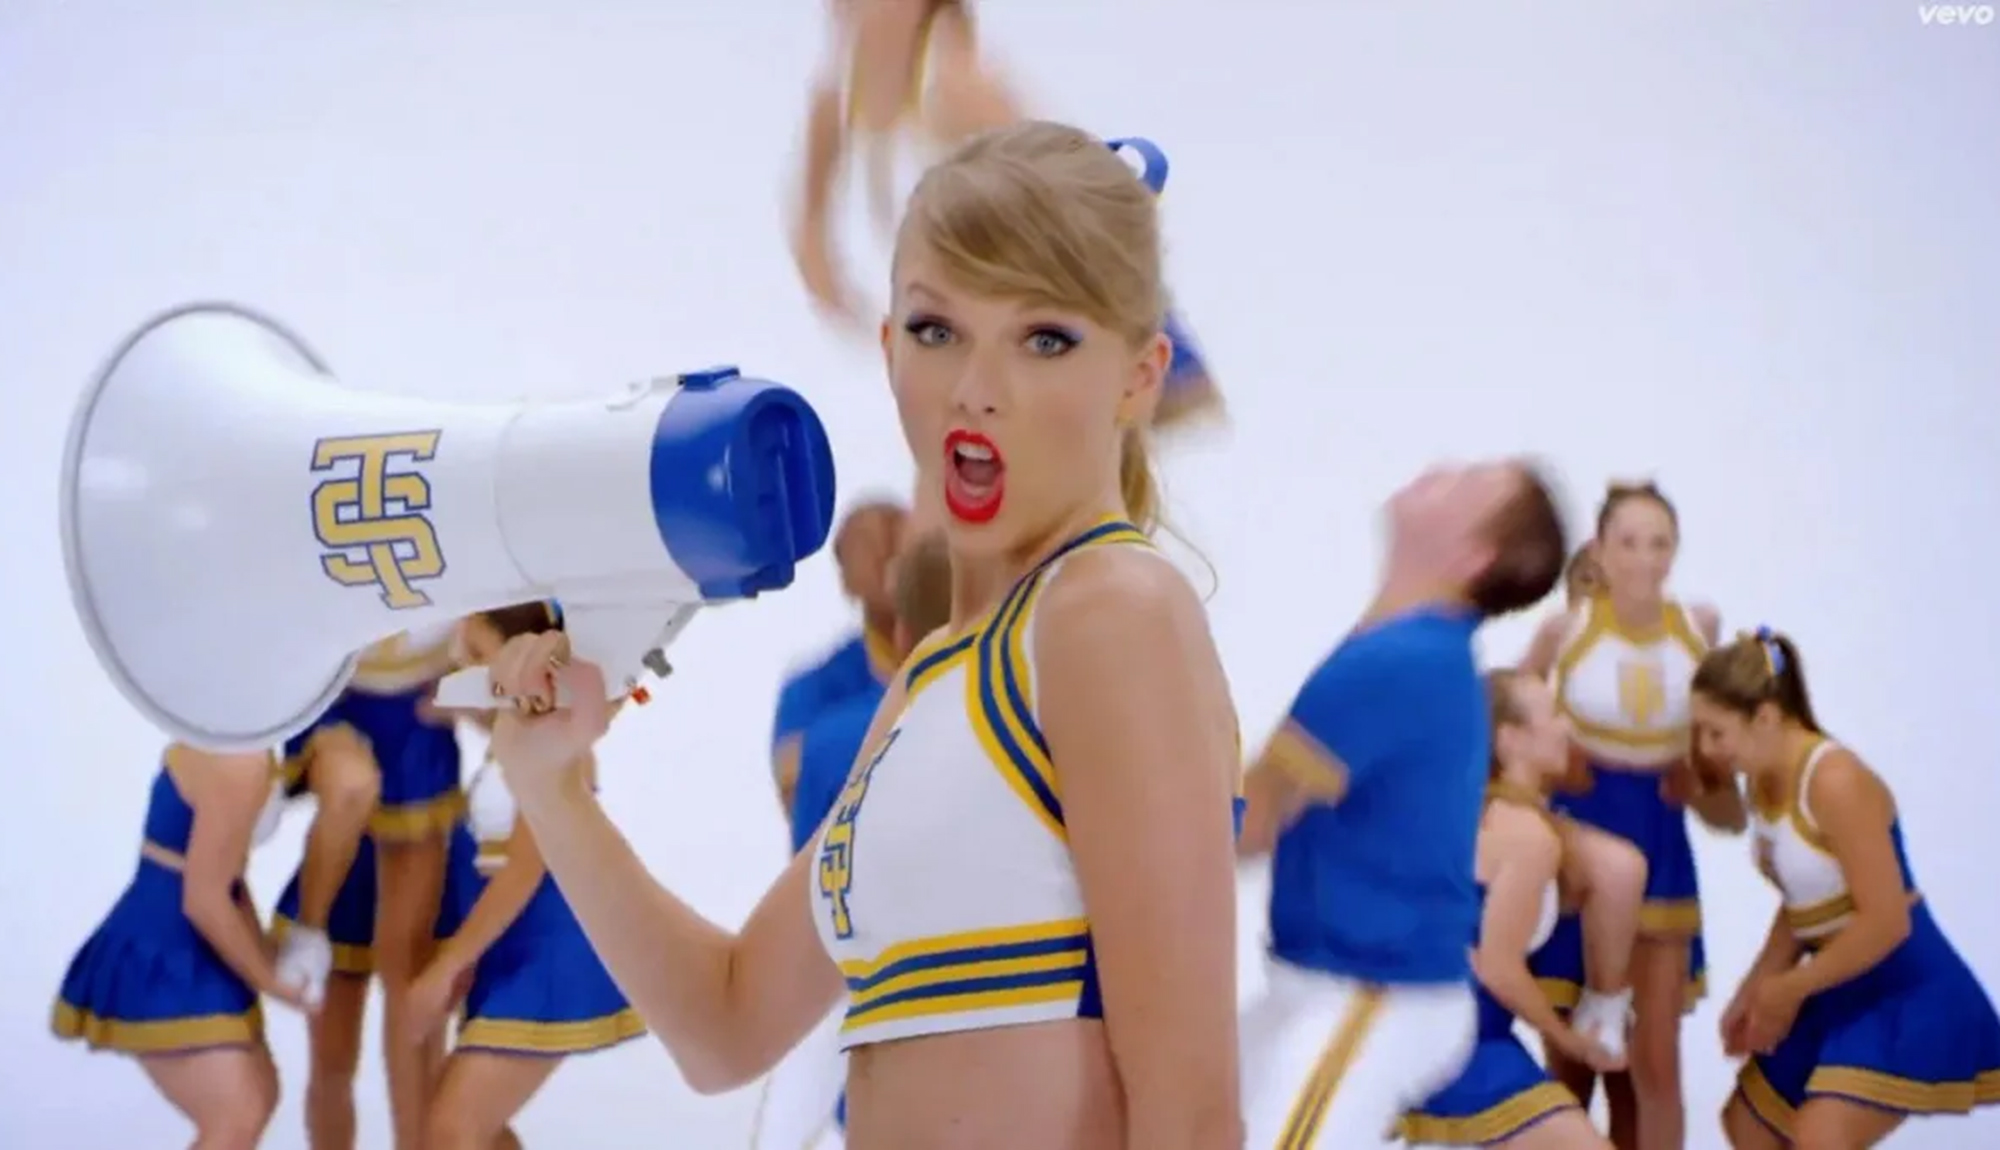 Taylor Swift dressed as a cheerleader in the "Shake It Off" video